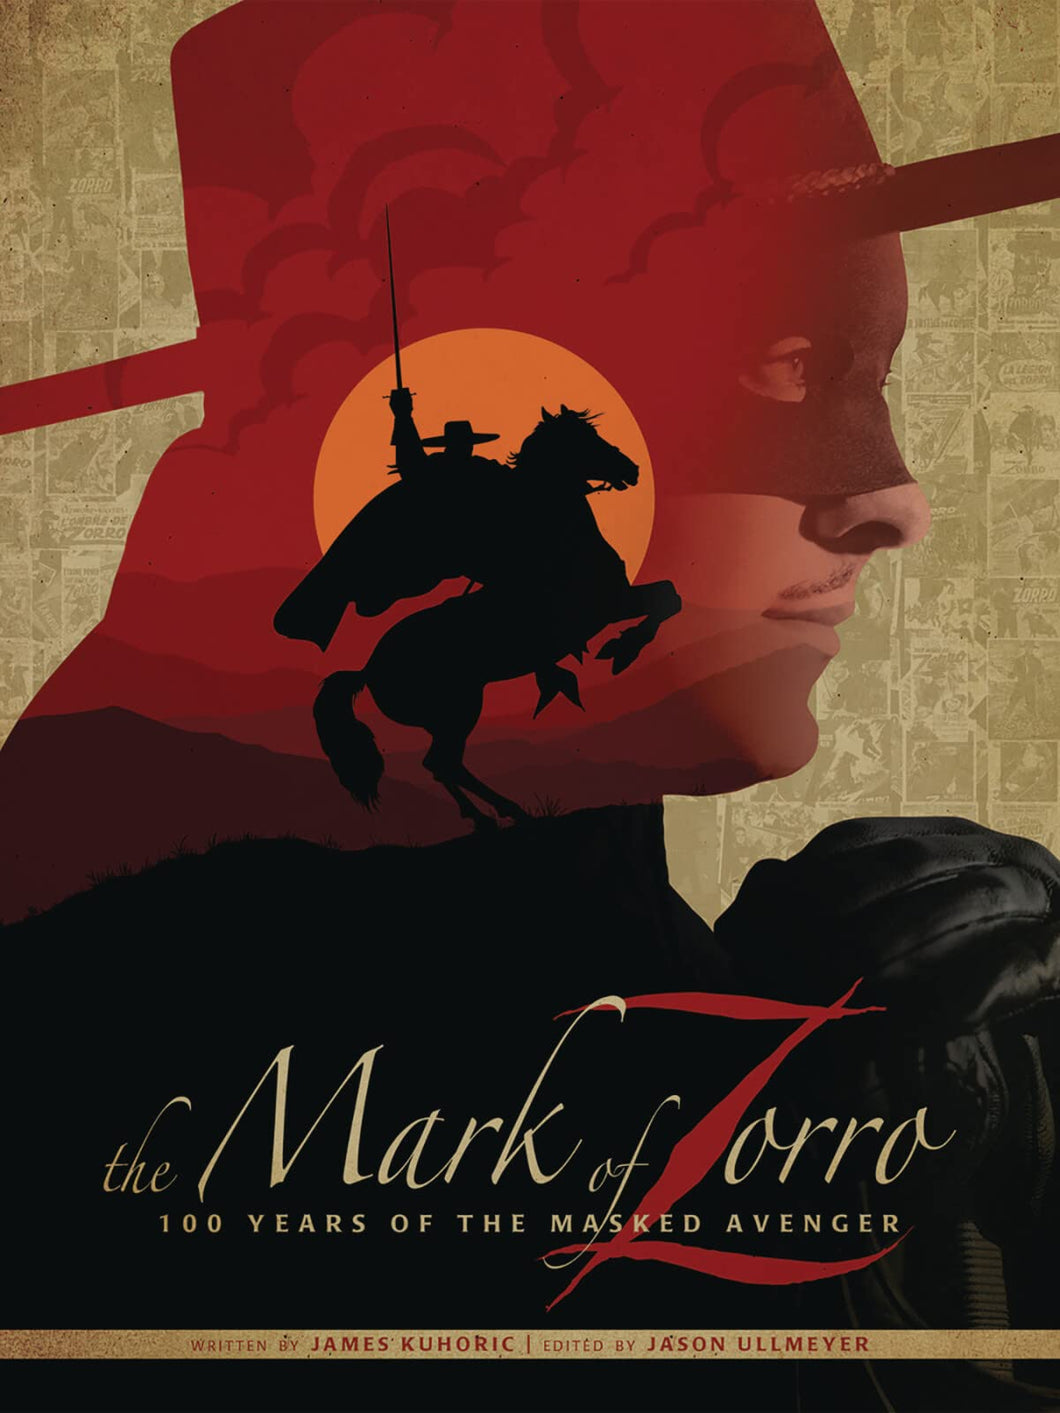 The Mark of Zorro 100 Years of the Masked Avenger Art Book